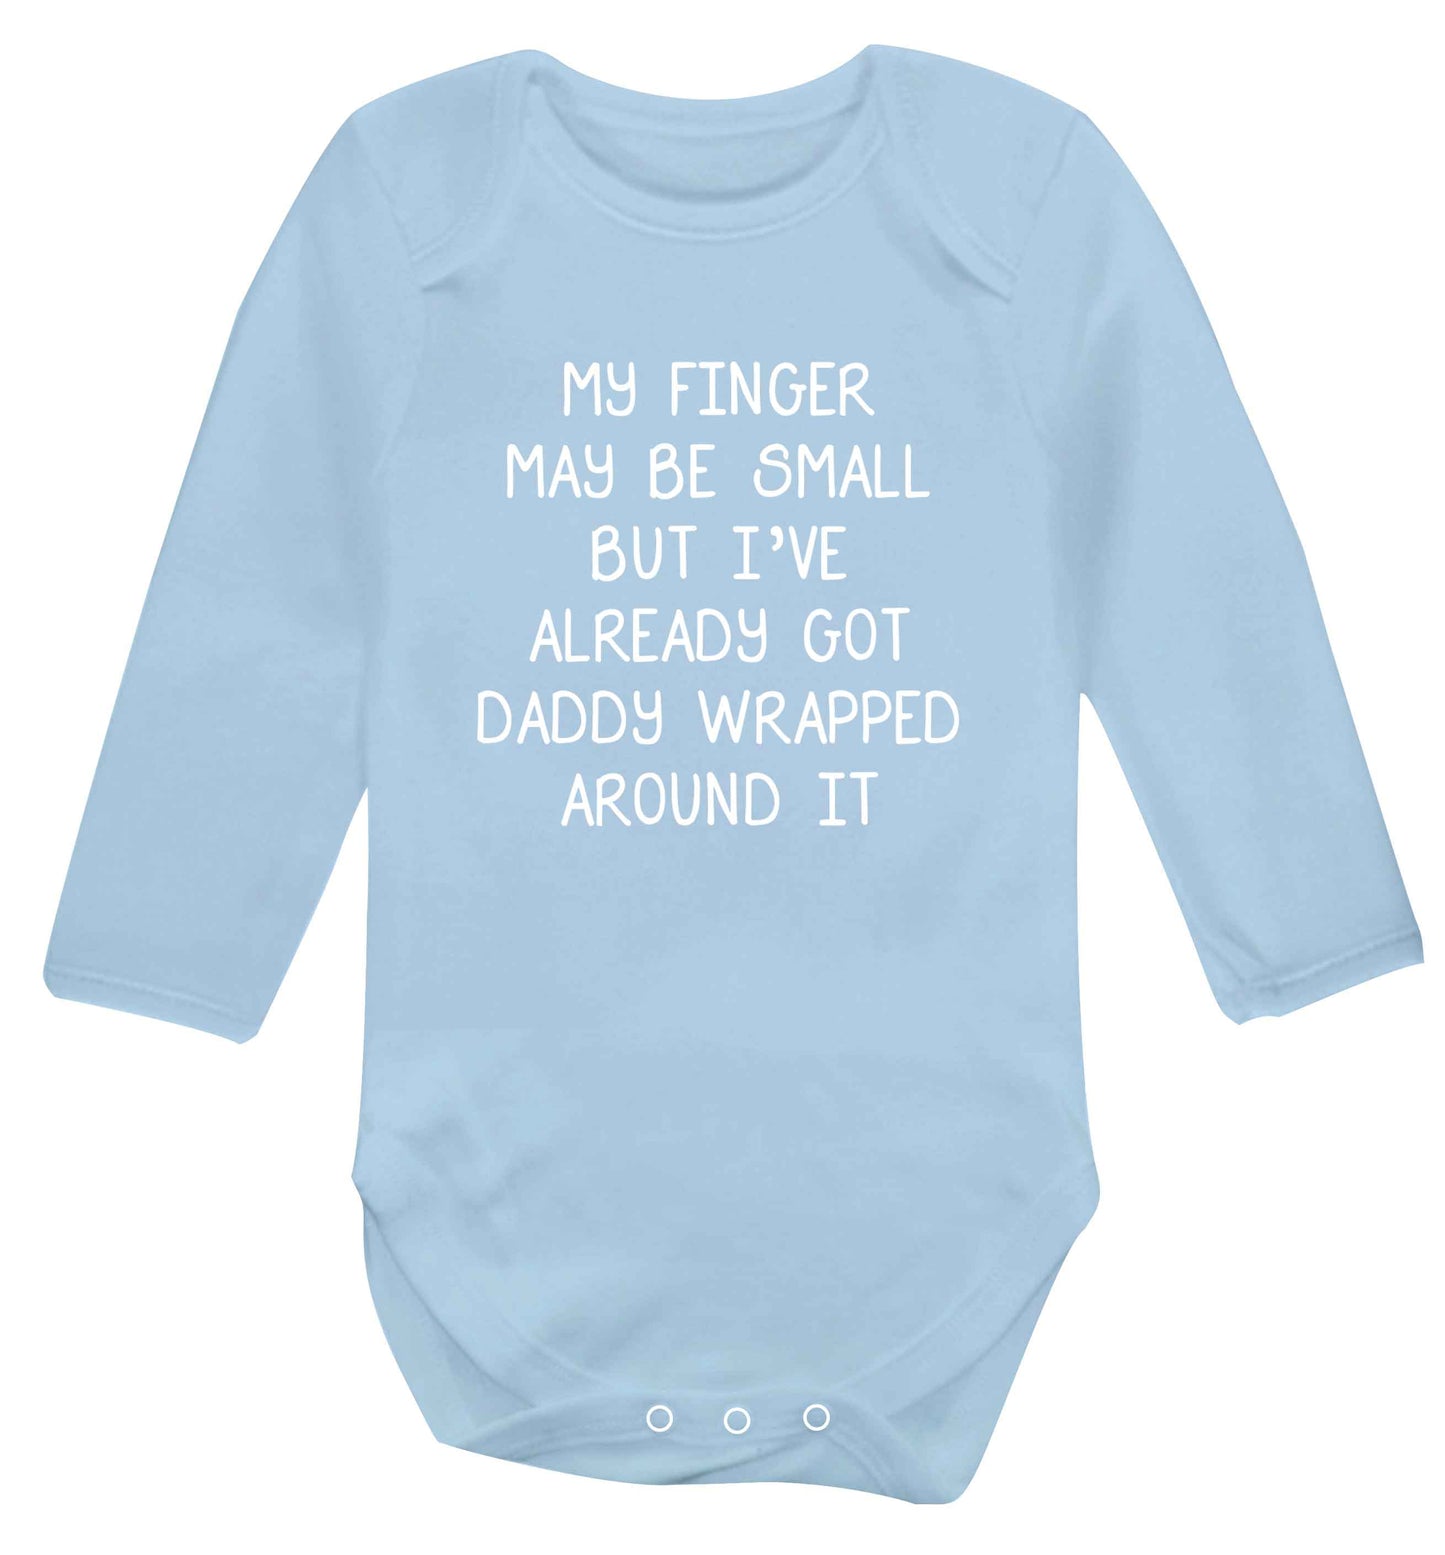 My finger may be small but I've already got daddy wrapped around it baby vest long sleeved pale blue 6-12 months